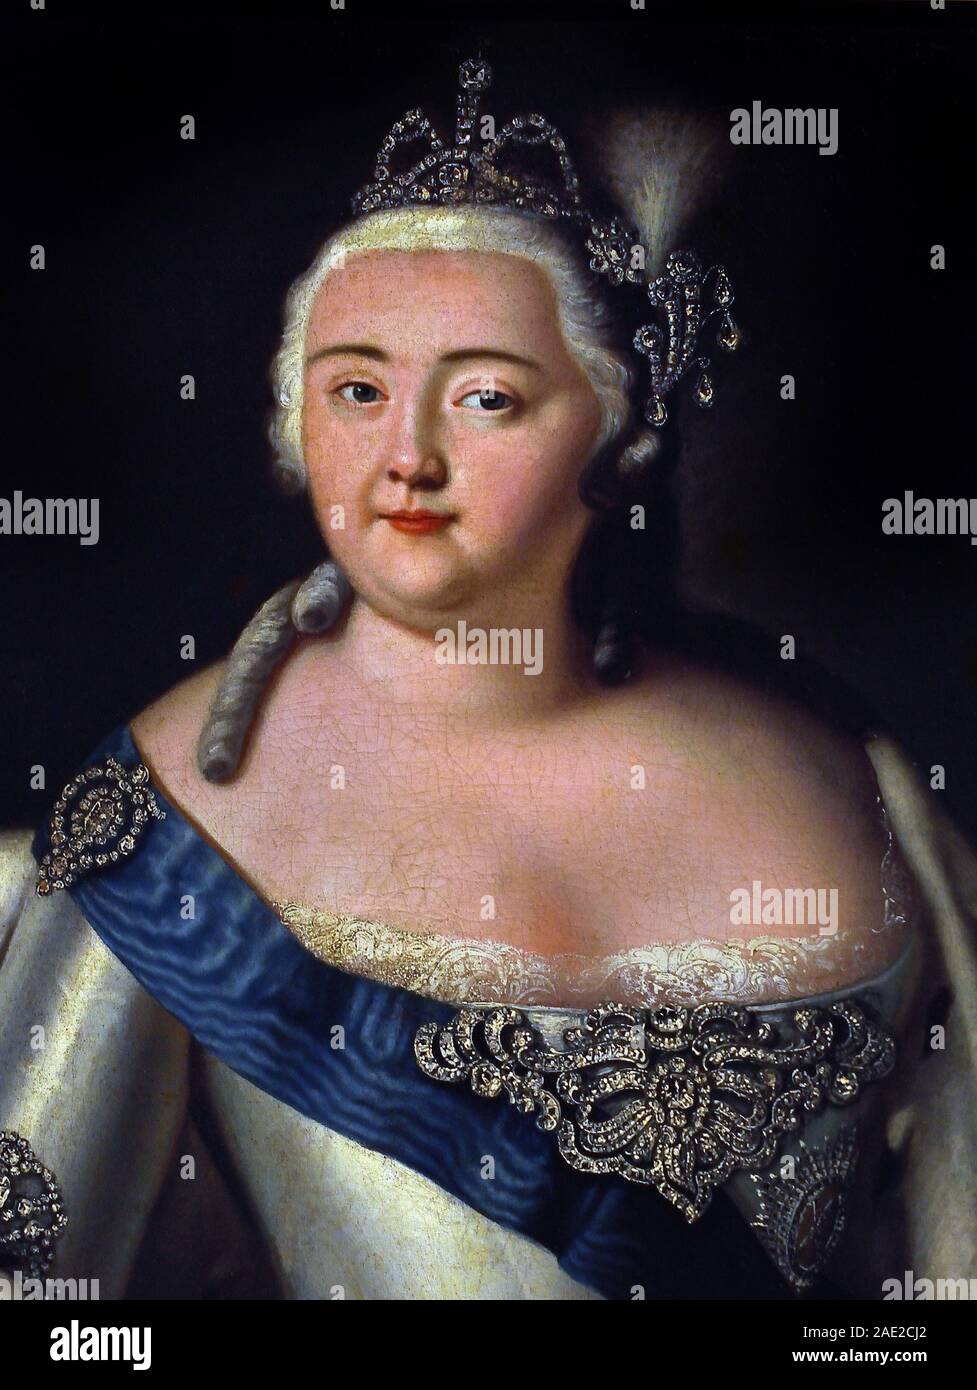 Tsarina Elisabeth 1750-1800 , Jewels of Russian imperial court, 18th-19th Century, Russia. Stock Photo